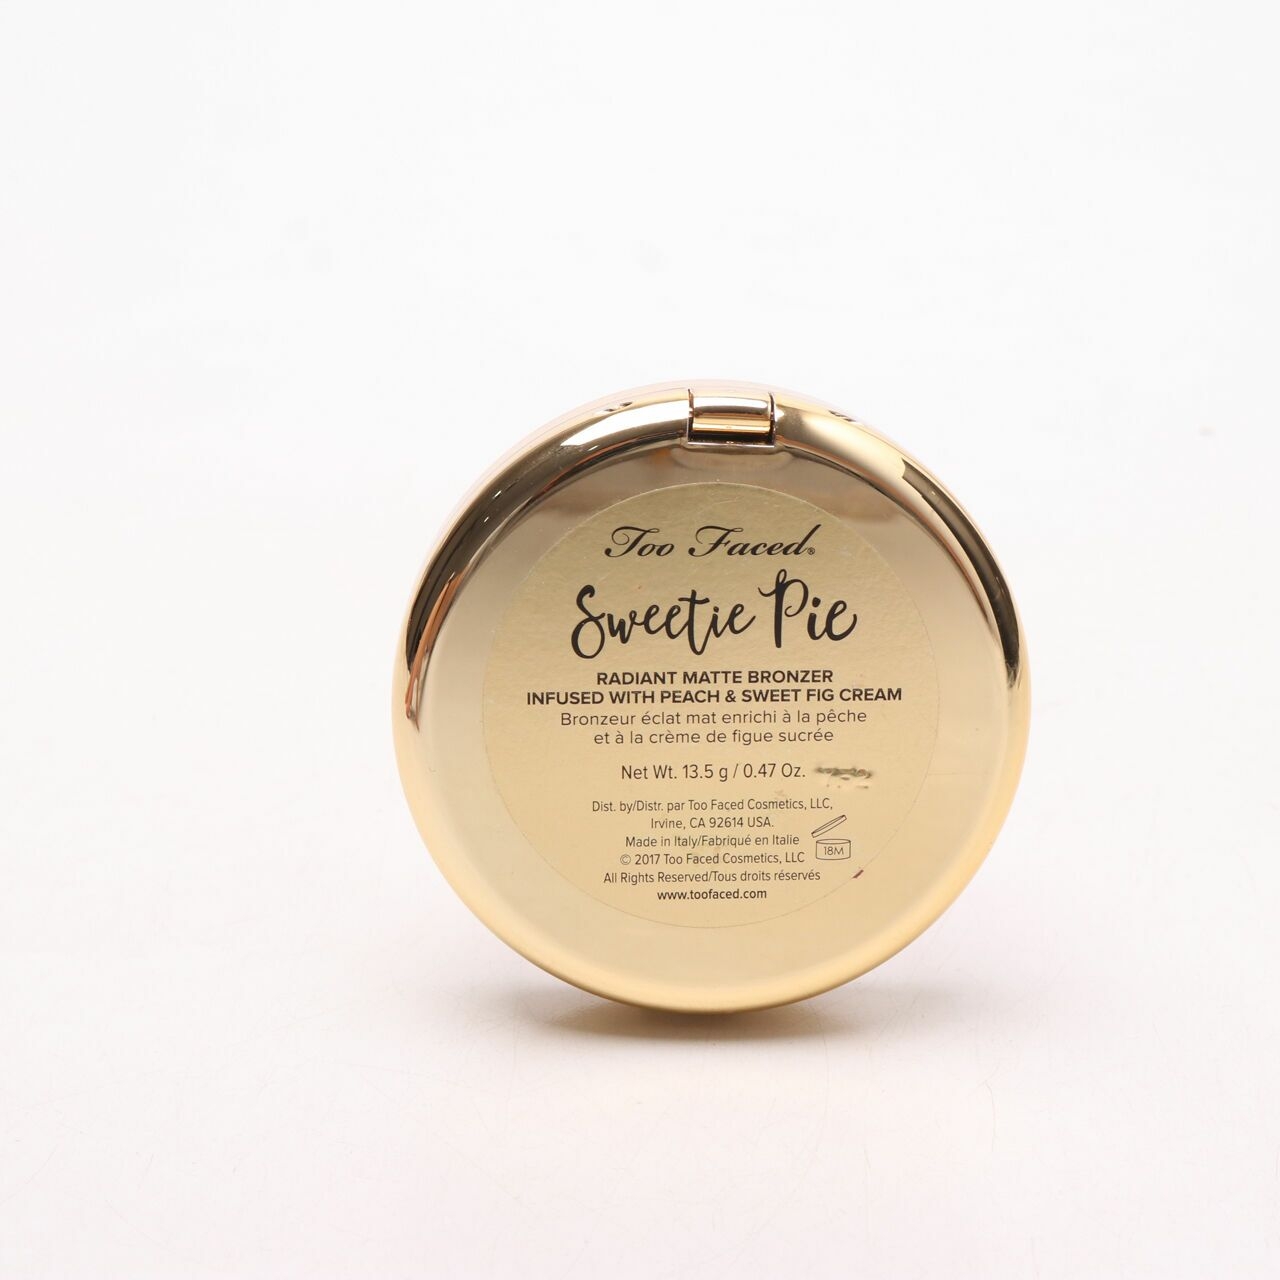 Too Faced Sweetie Pie Radiant Matte Bronzer Faces